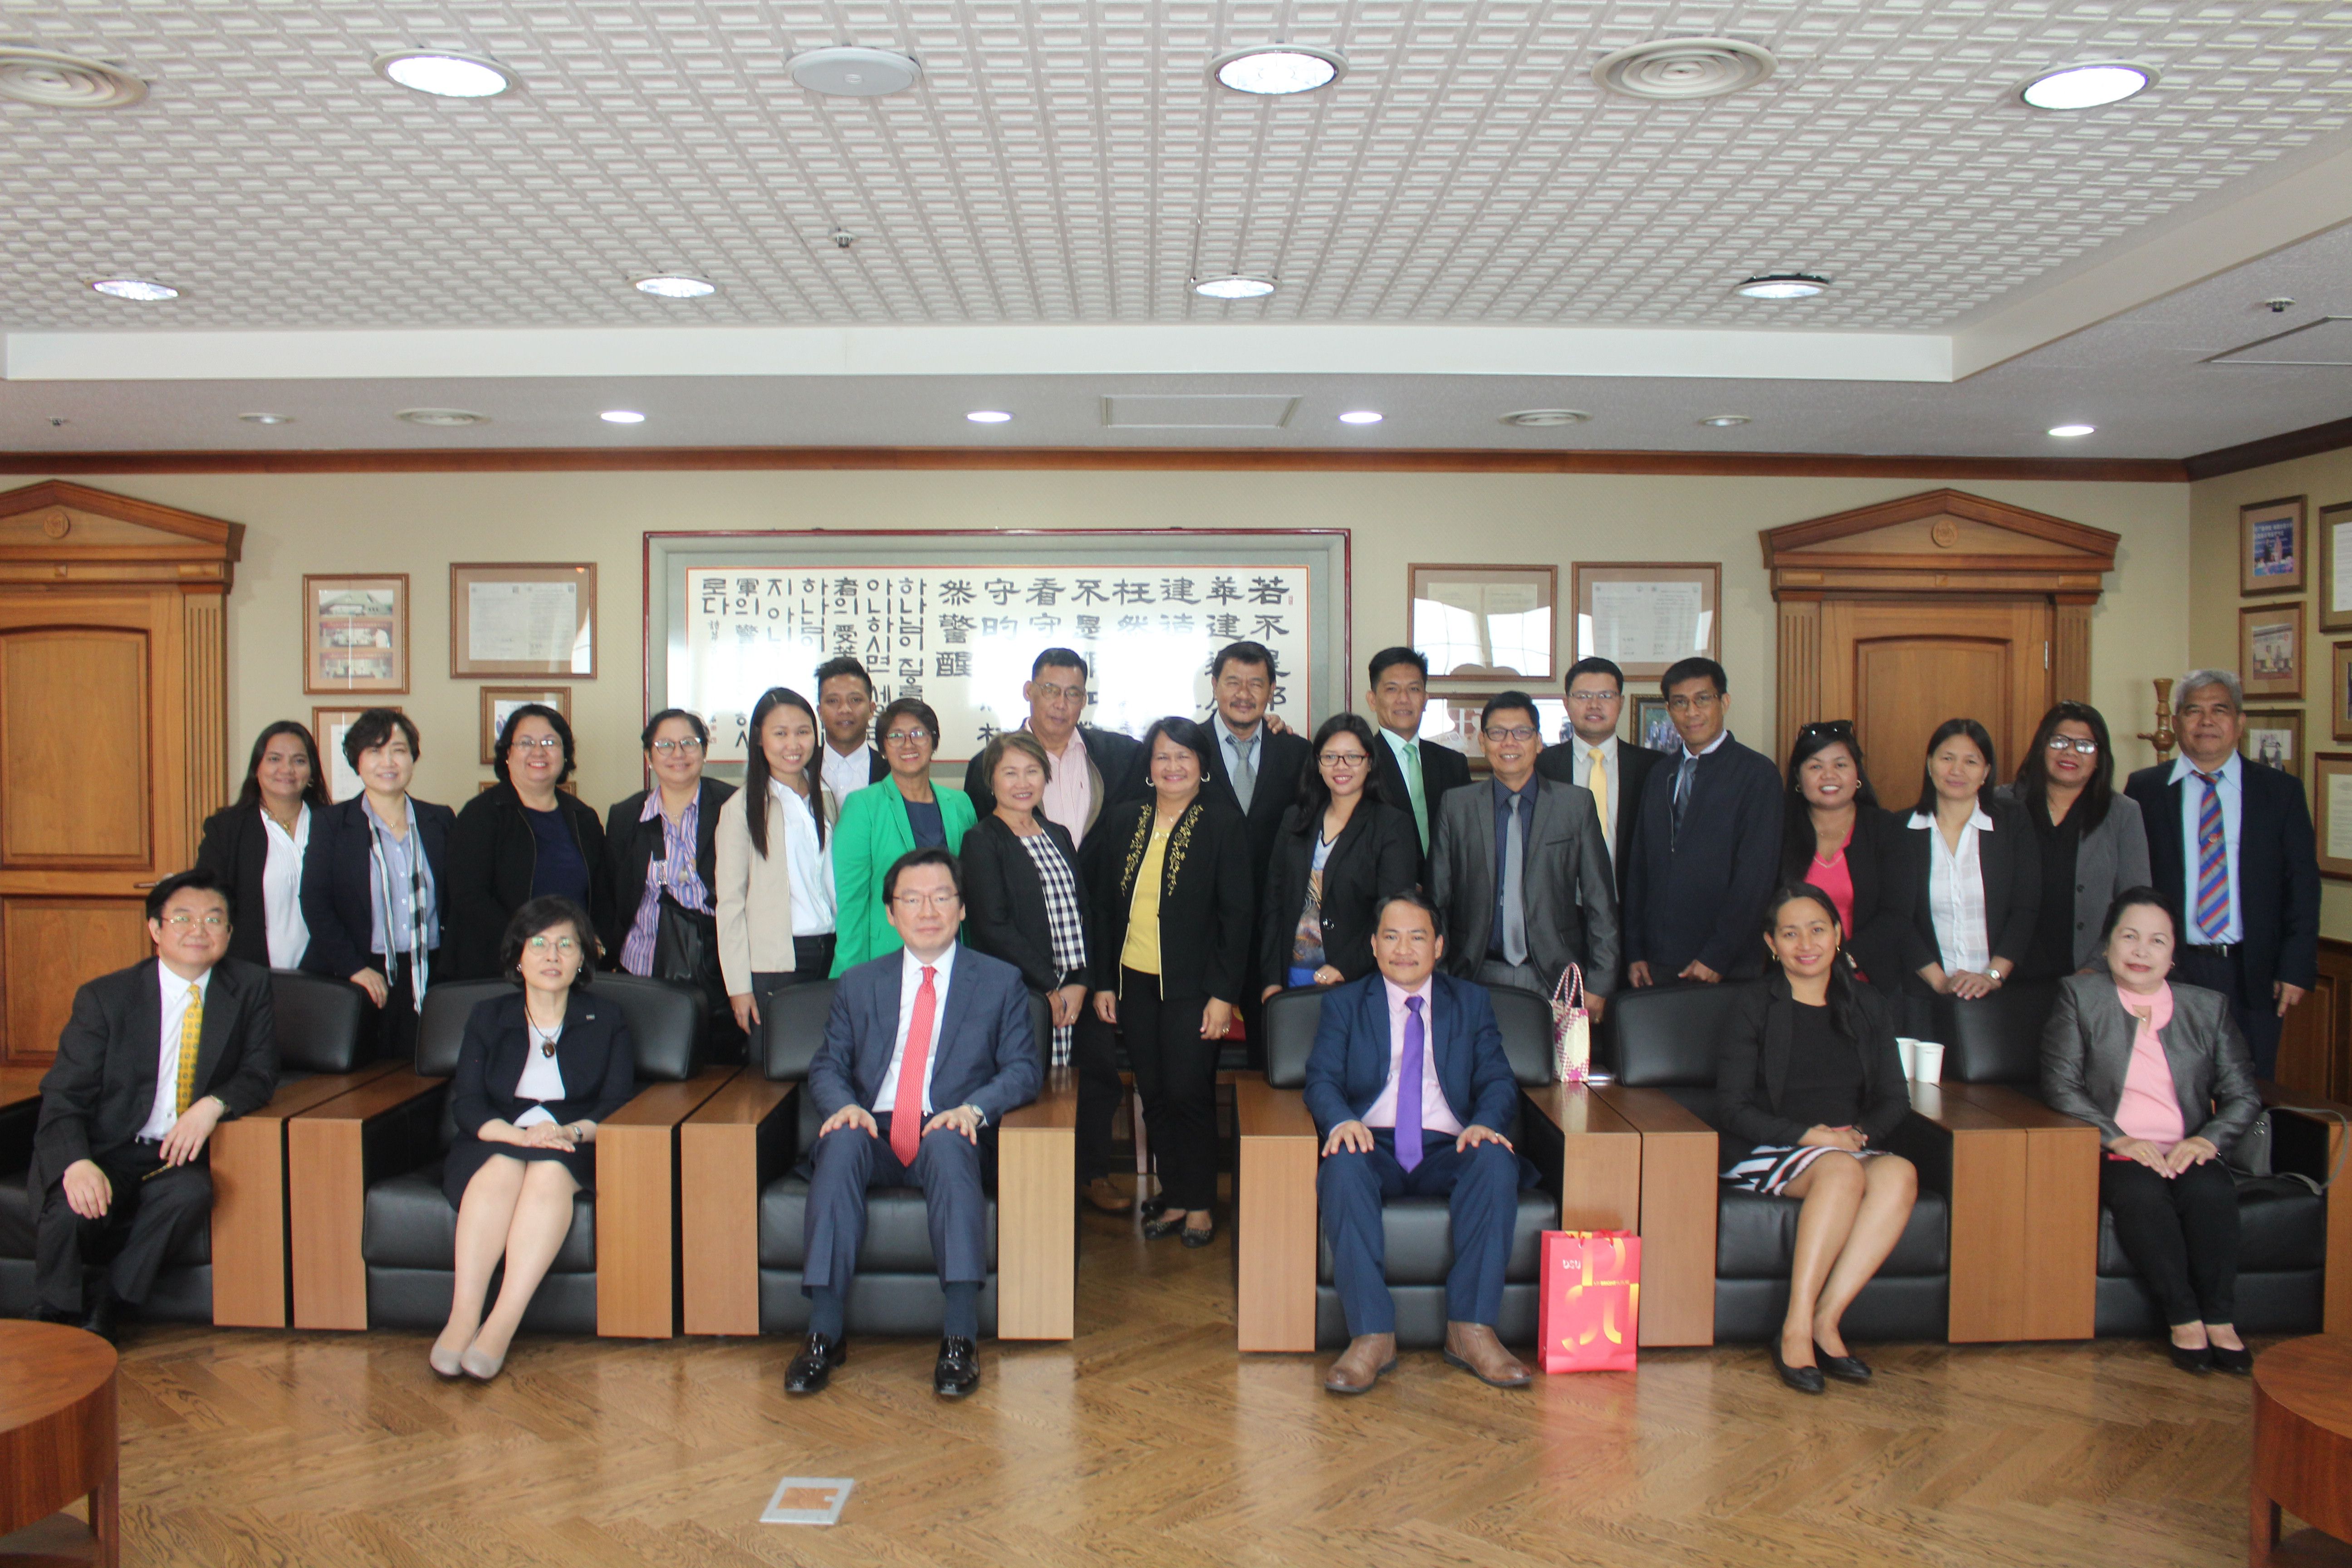 CNSC administrative council visits Dongseo University in Korea for global bench learning